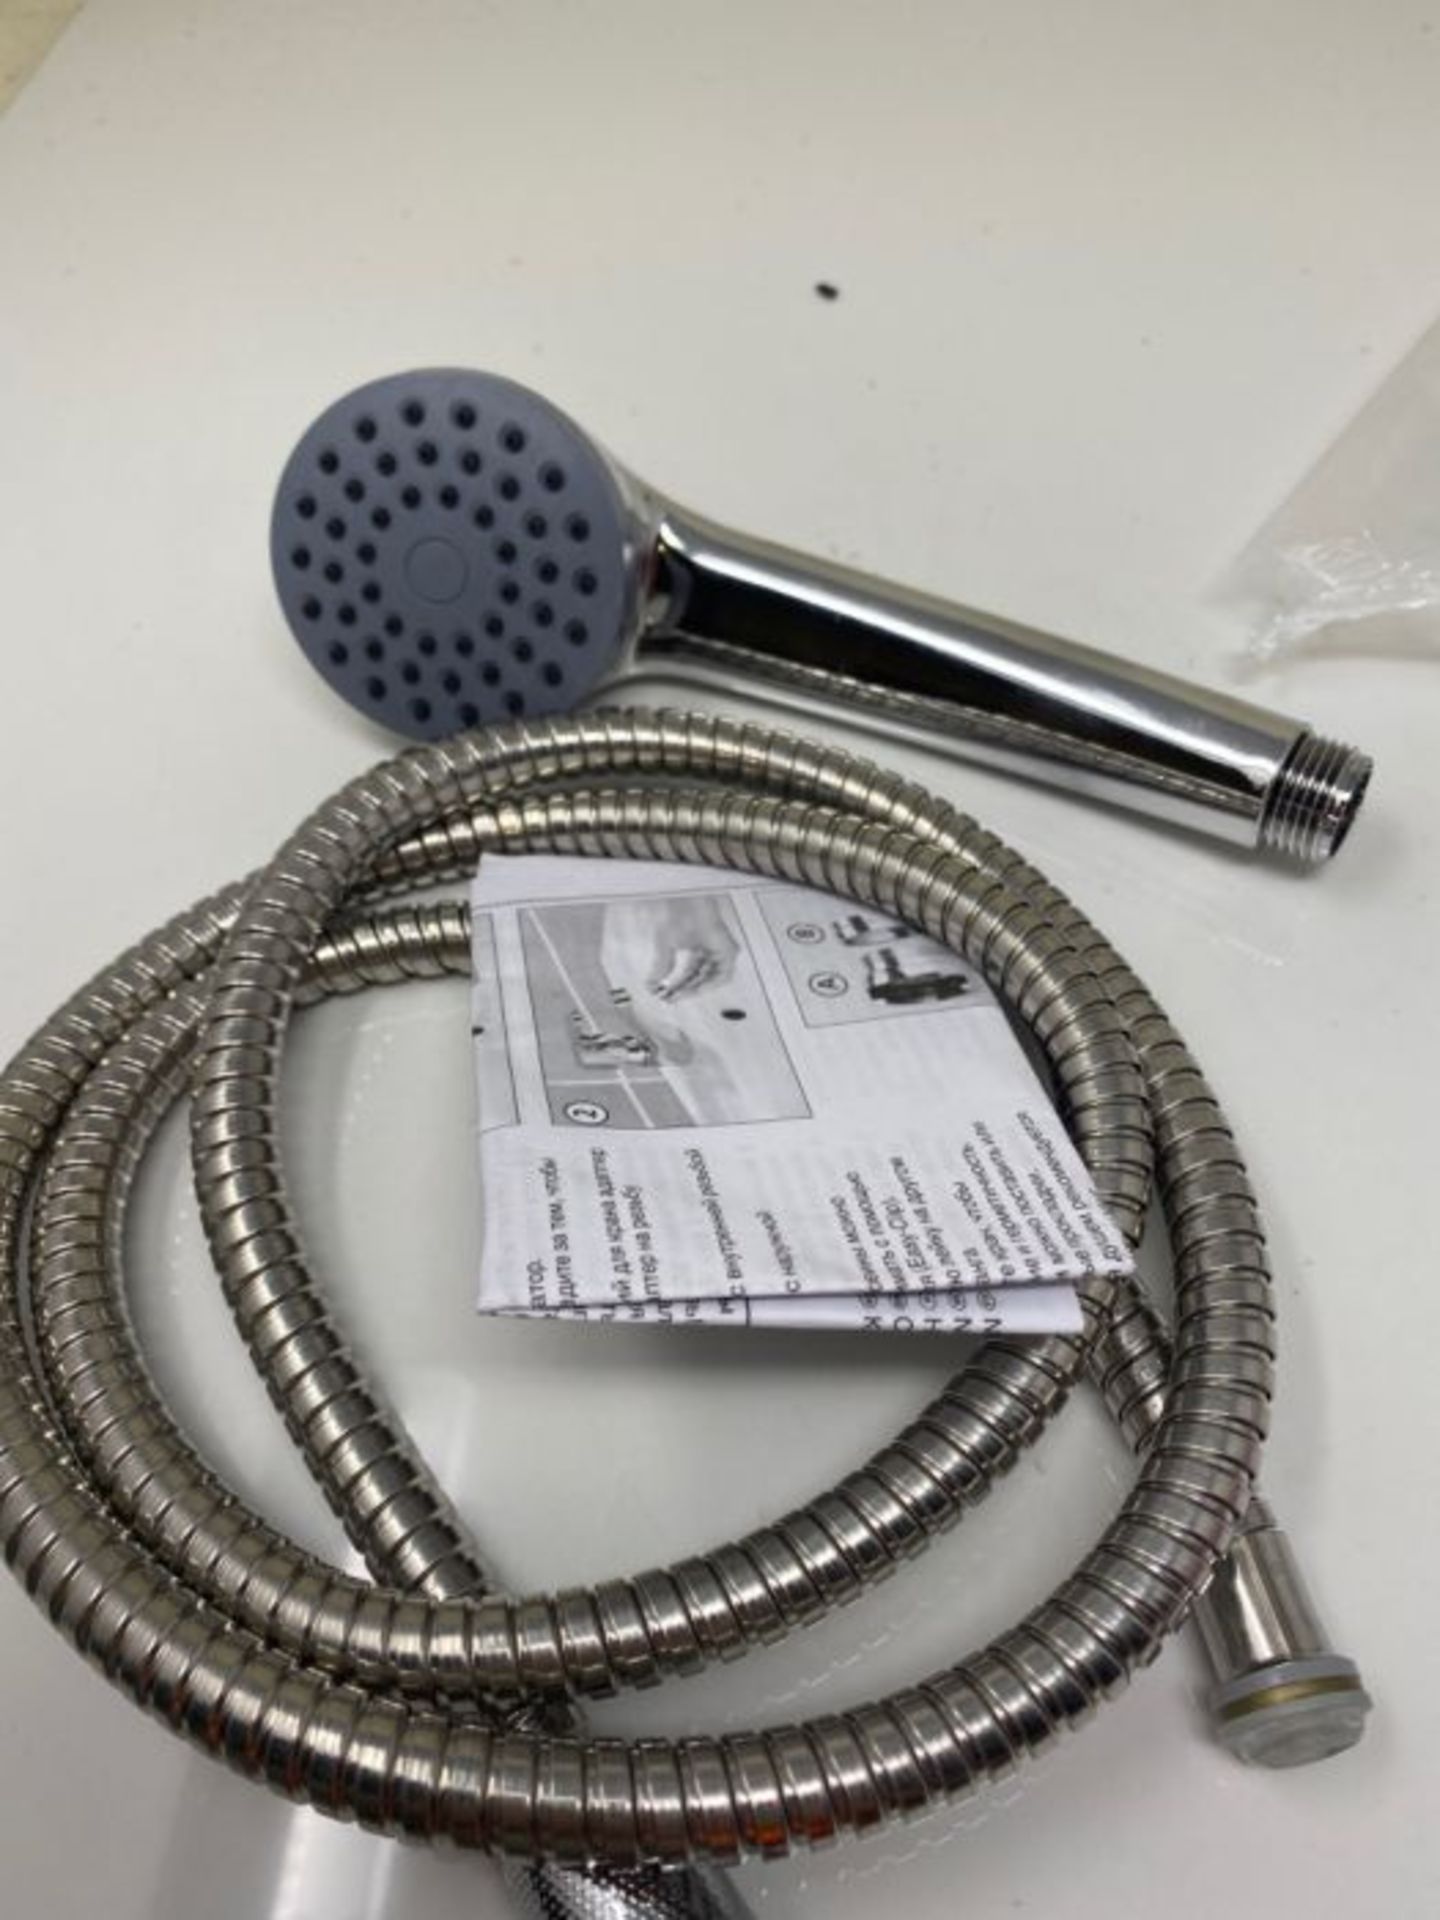 WENKO WK22866 handbasin-Mobile Hand Stainless Steel Shower Hose, Silver Shiny, 6.5 x 1 - Image 2 of 2